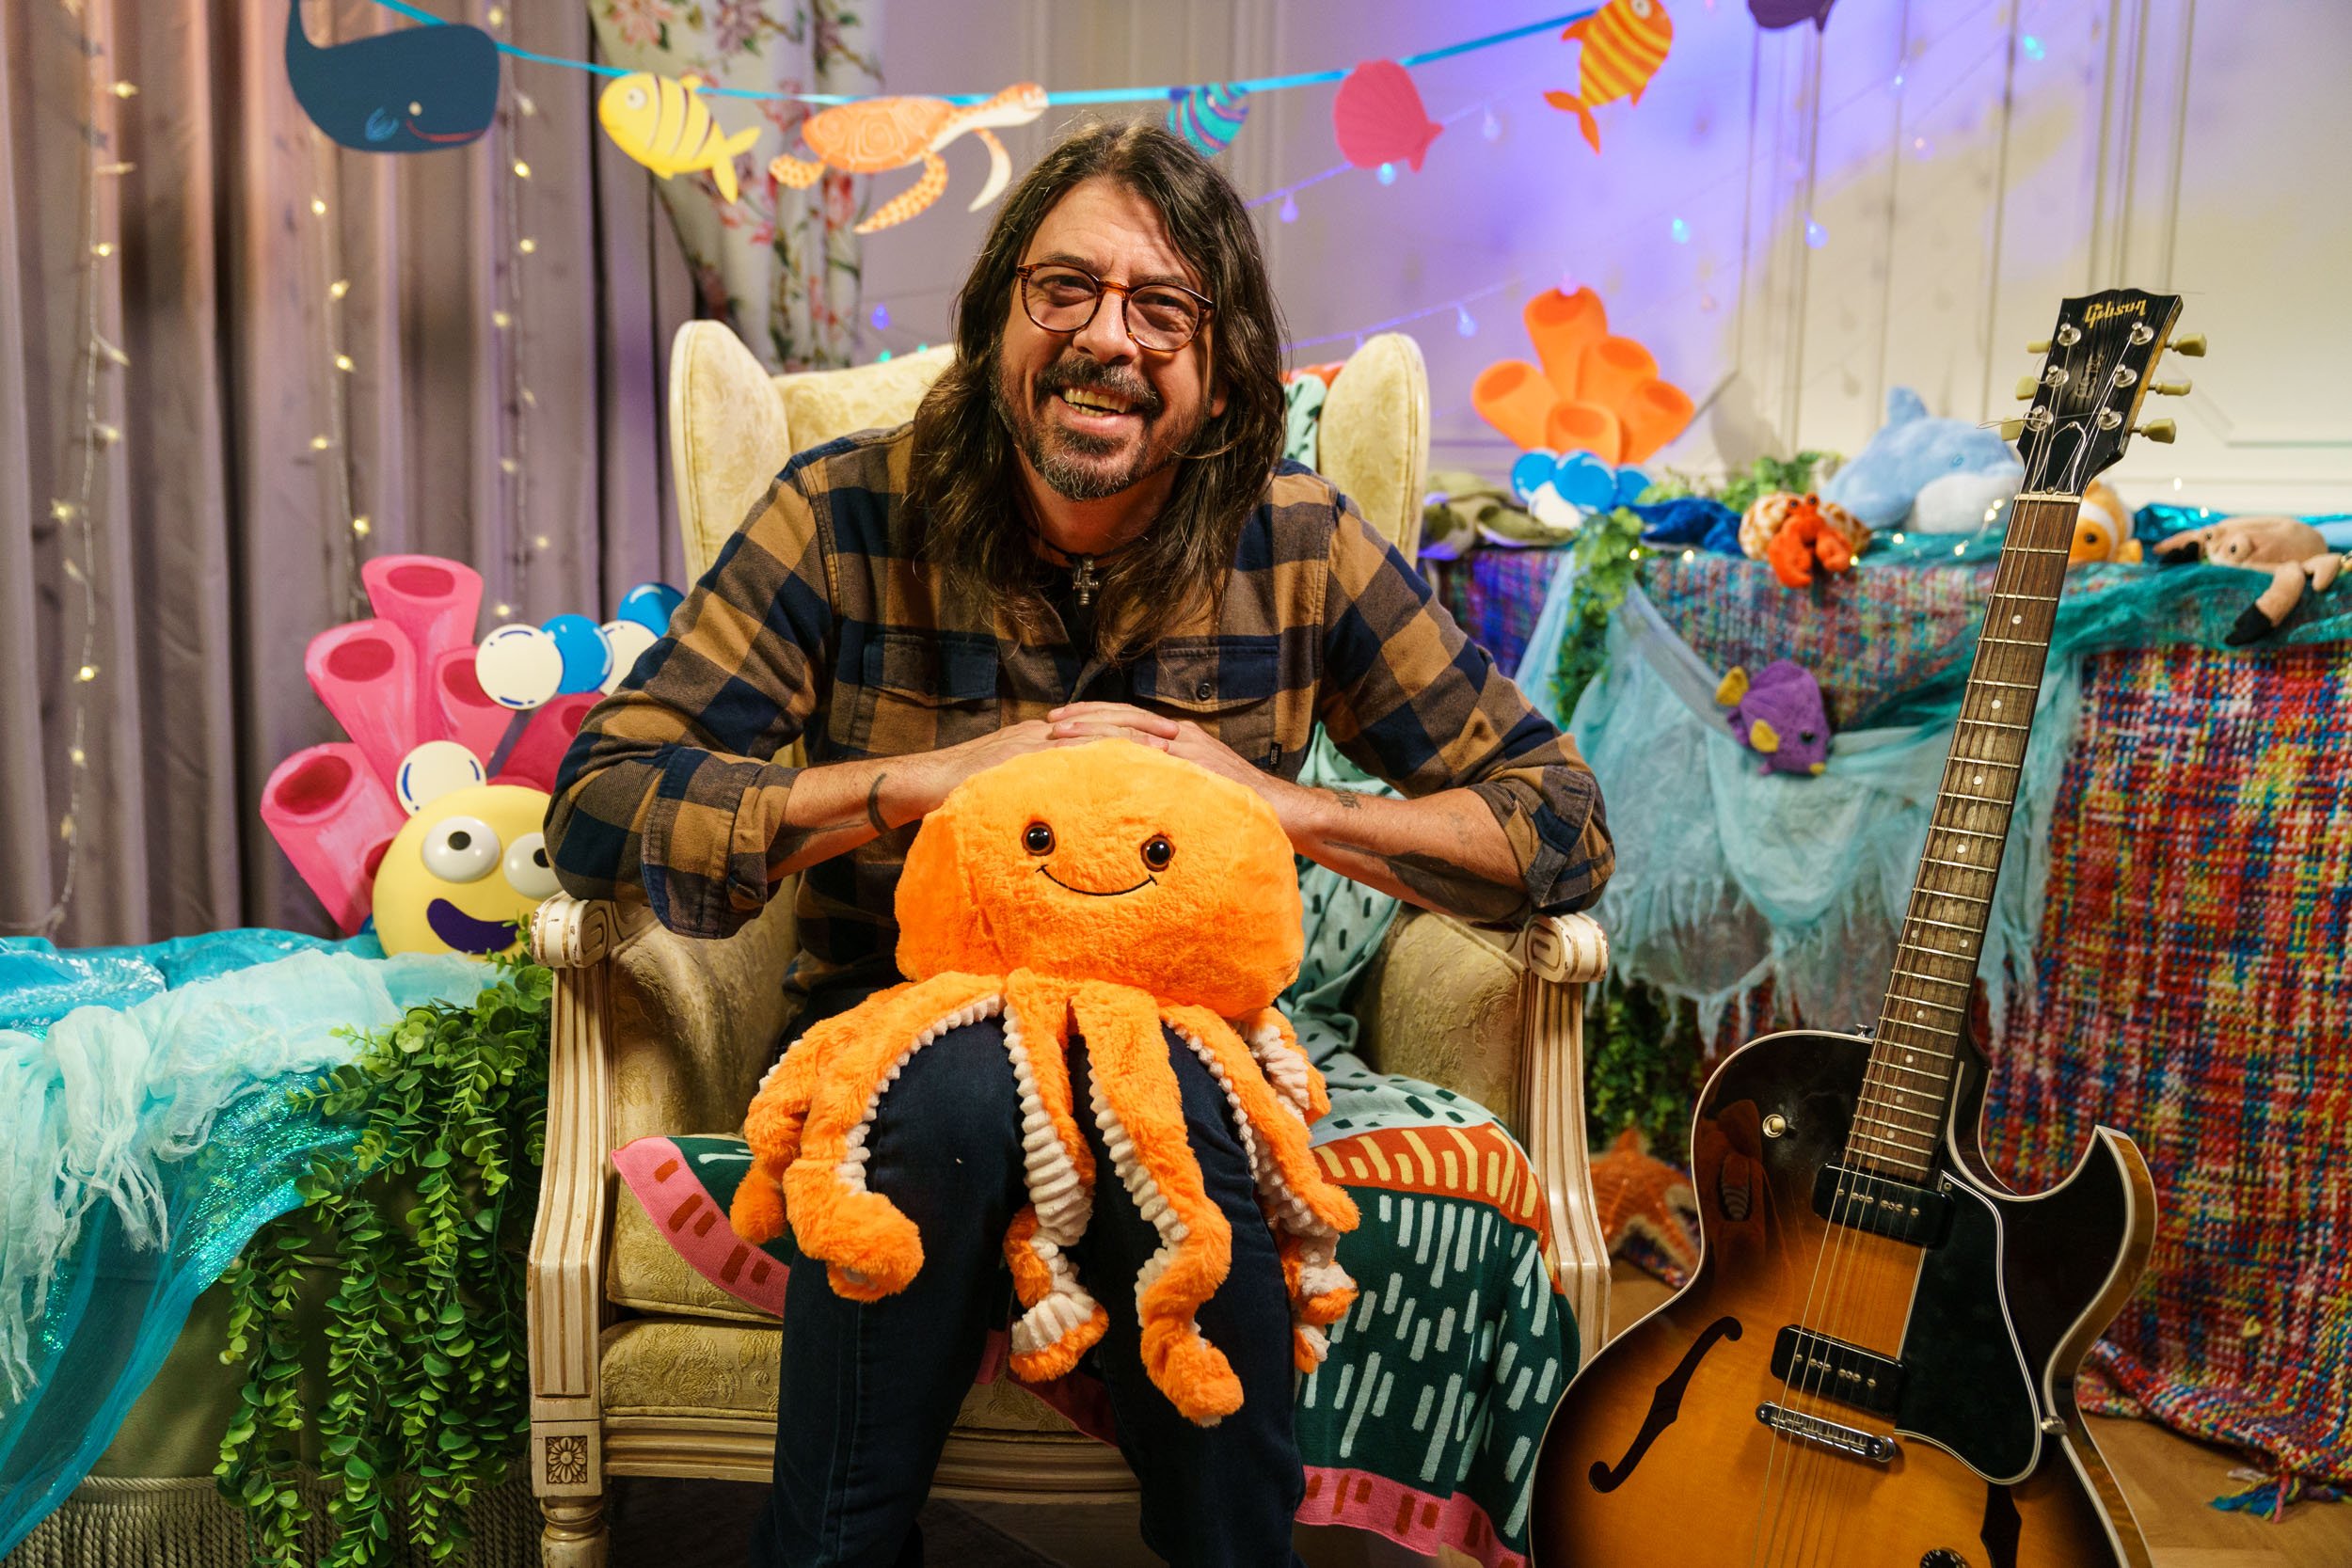  Dave Grohl  CBeebies / BBC 